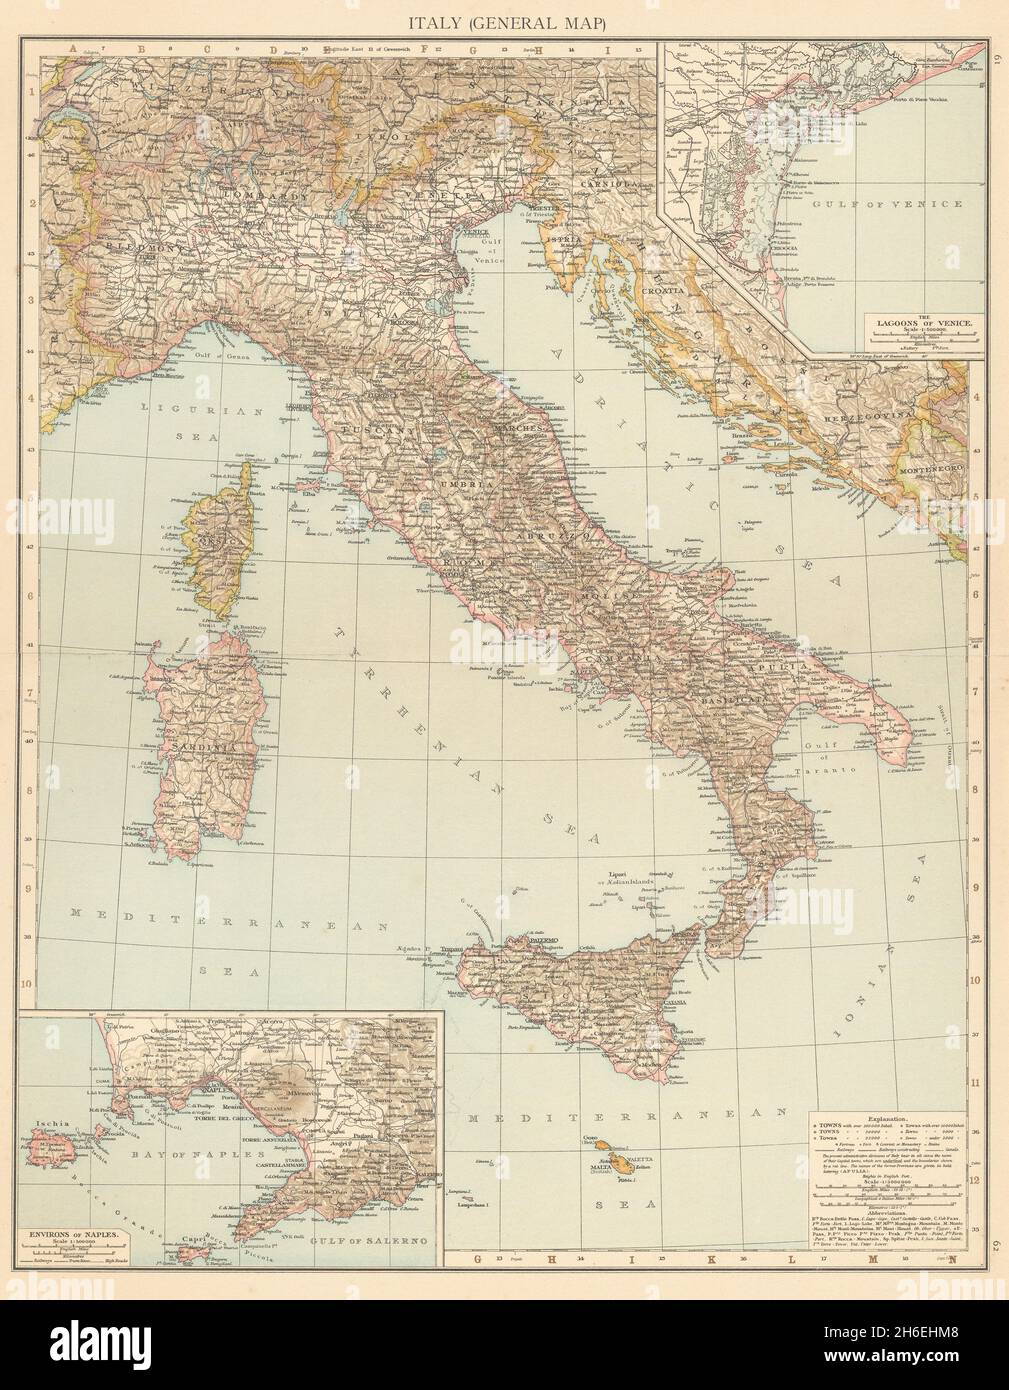 Italy (general map). Lagoons of Venice. Environs of Naples. THE TIMES 1895 Stock Photo